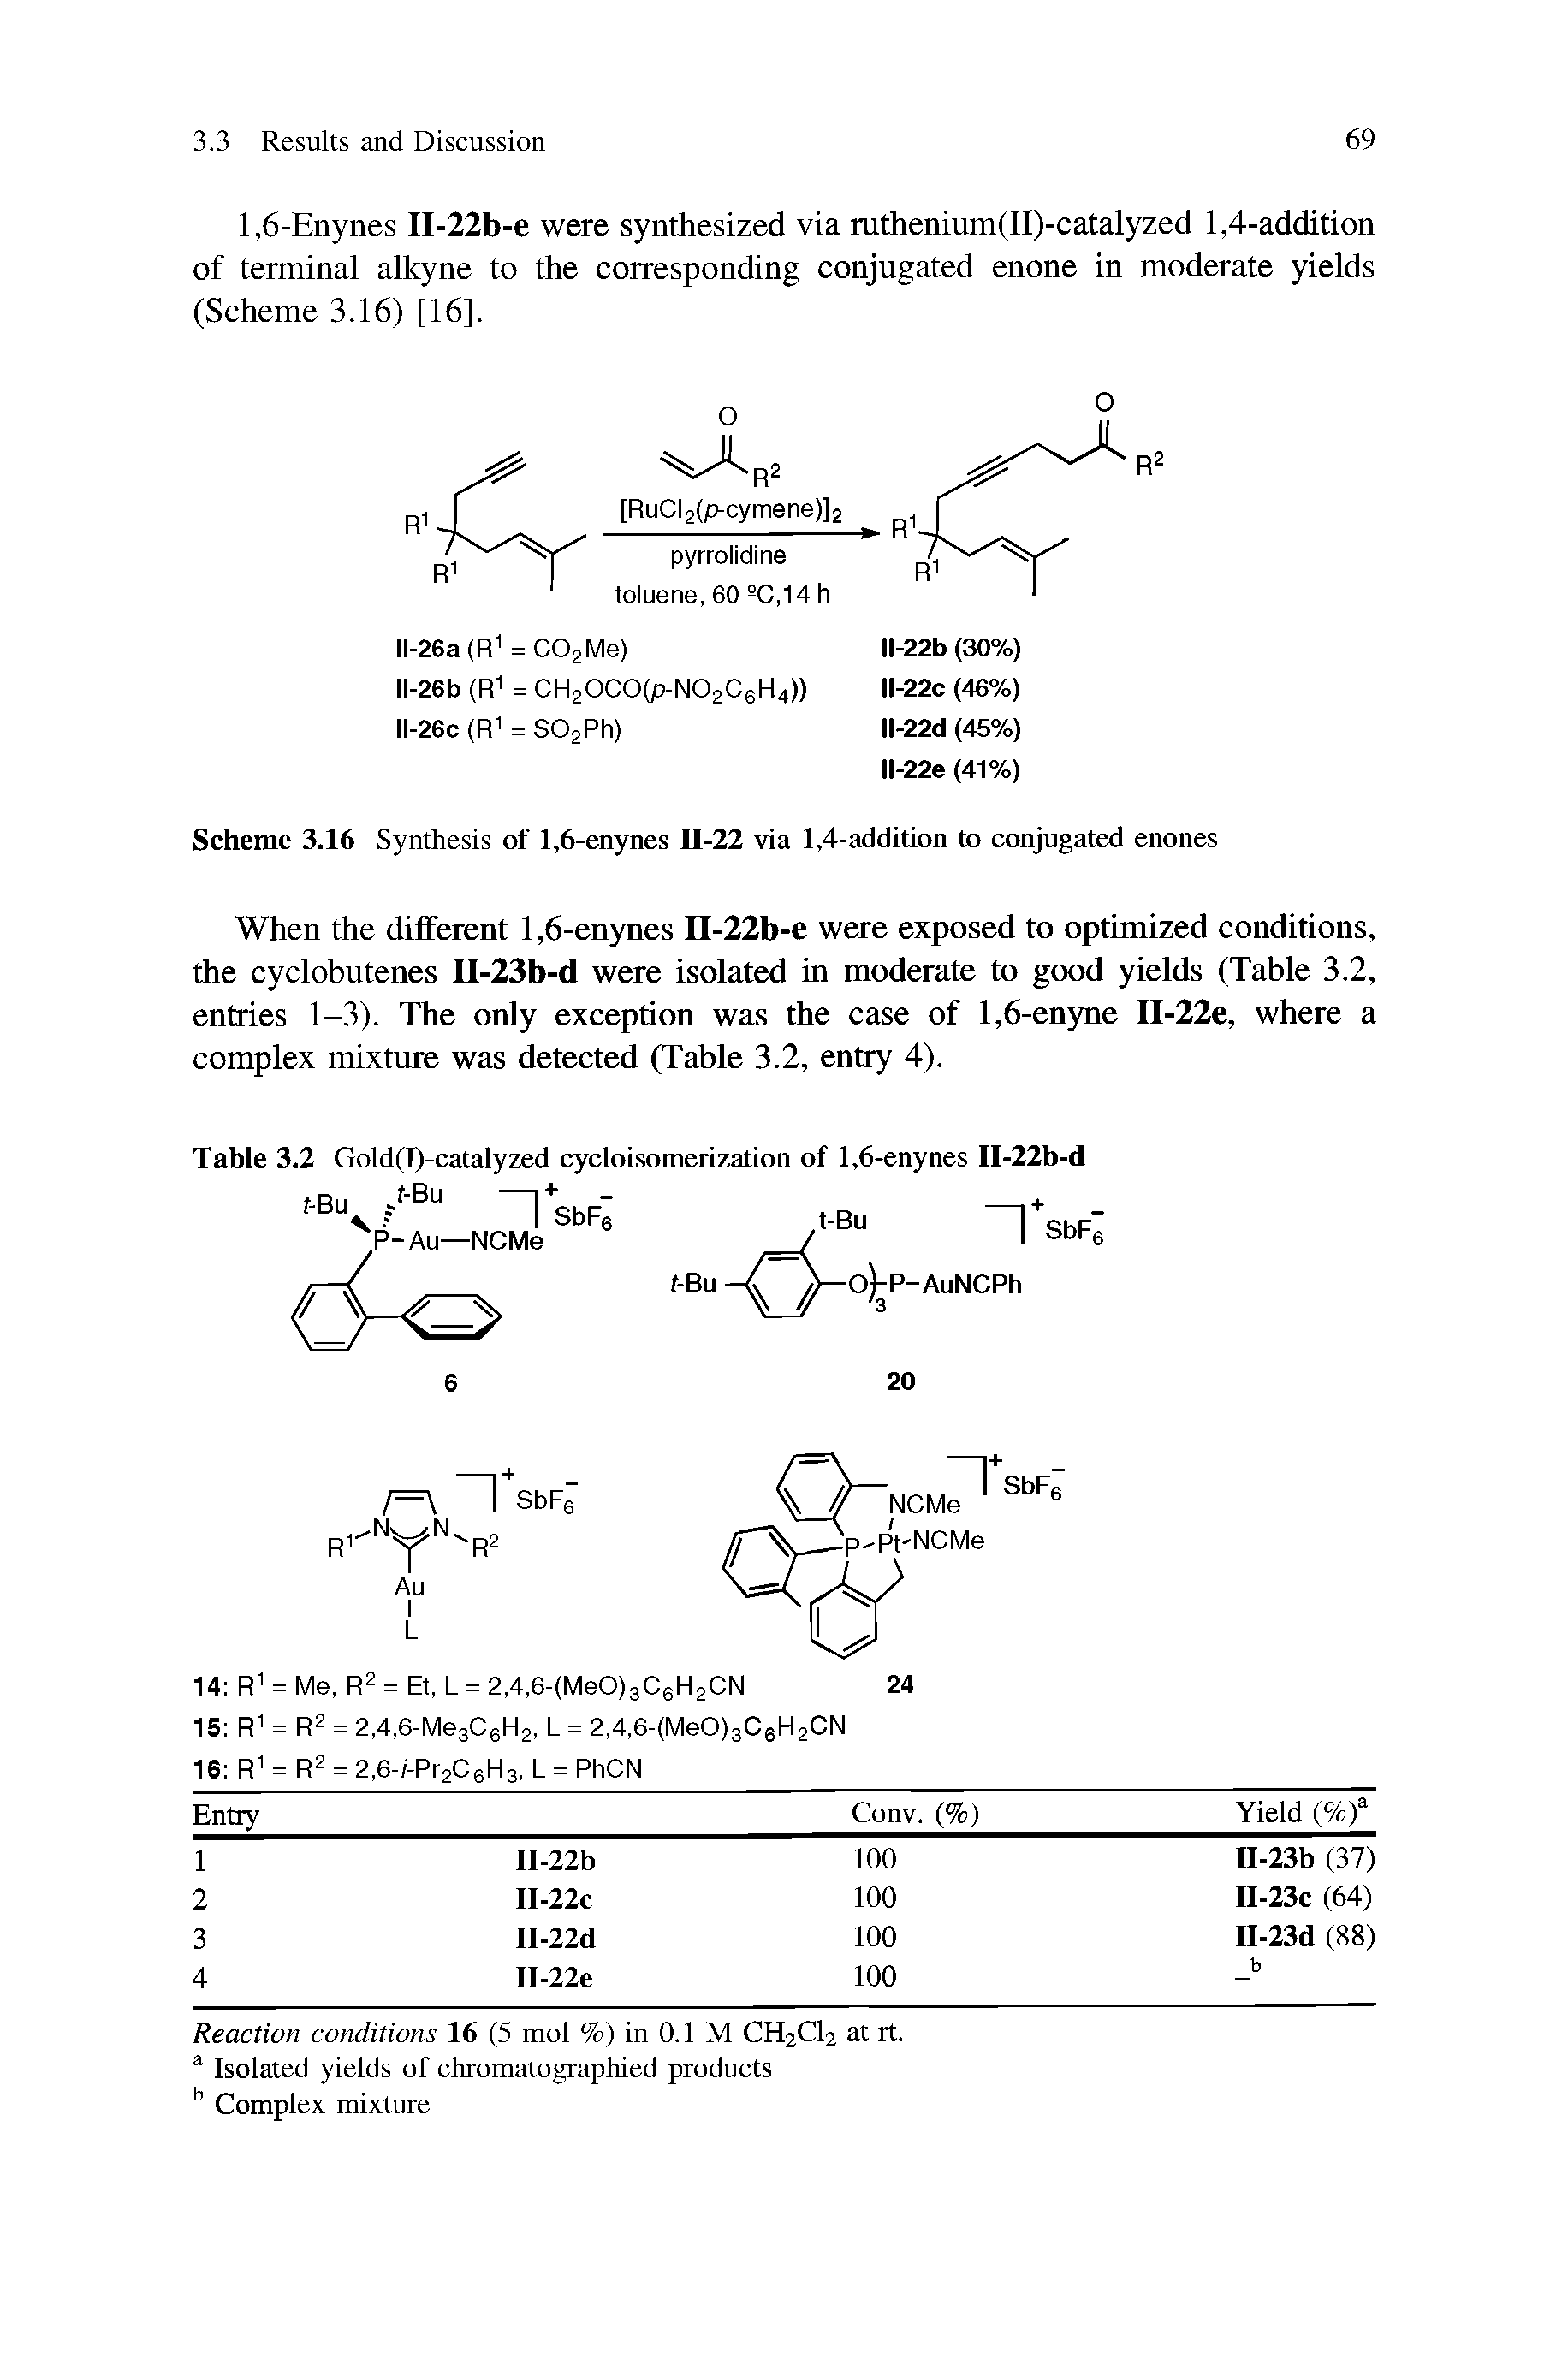 Scheme 3.16 Synthesis of 1,6-enynes 11-22 via 1,4-addition to conjugated enones...